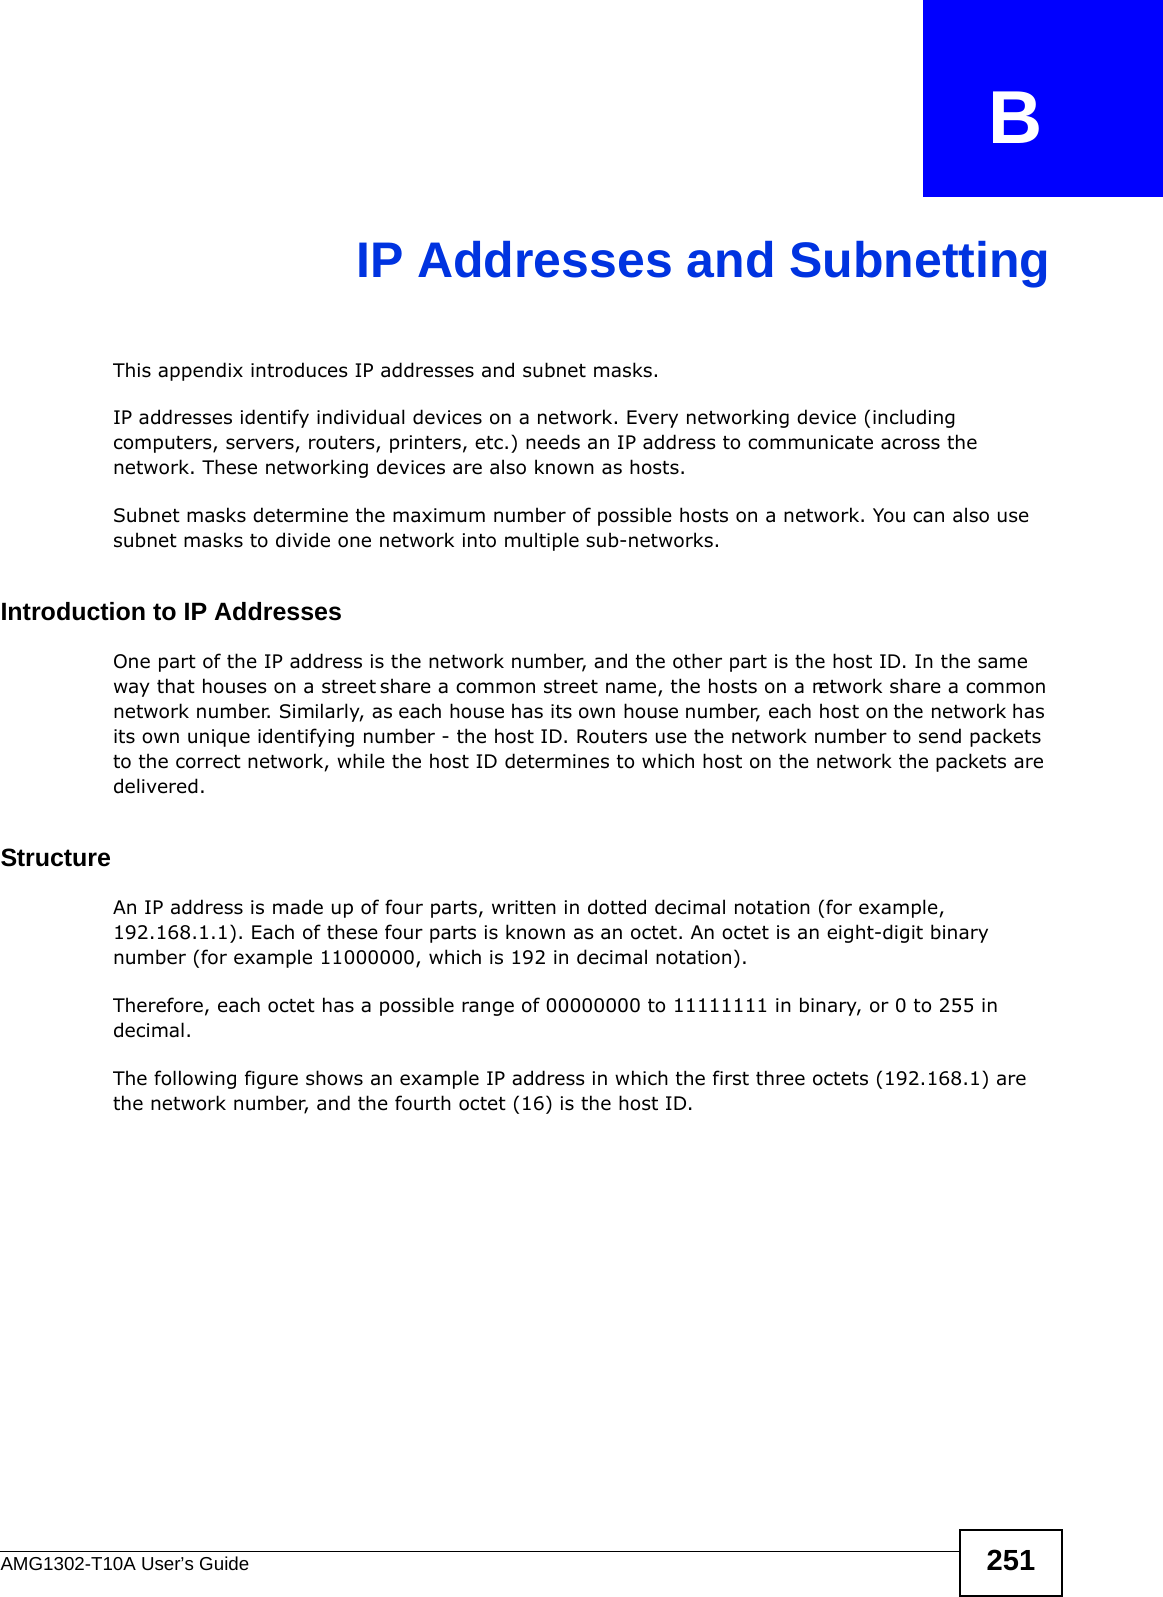 AMG1302-T10A User’s Guide 251APPENDIX   BIP Addresses and SubnettingThis appendix introduces IP addresses and subnet masks. IP addresses identify individual devices on a network. Every networking device (including computers, servers, routers, printers, etc.) needs an IP address to communicate across the network. These networking devices are also known as hosts.Subnet masks determine the maximum number of possible hosts on a network. You can also use subnet masks to divide one network into multiple sub-networks.Introduction to IP AddressesOne part of the IP address is the network number, and the other part is the host ID. In the same way that houses on a street share a common street name, the hosts on a network share a common network number. Similarly, as each house has its own house number, each host on the network has its own unique identifying number - the host ID. Routers use the network number to send packets to the correct network, while the host ID determines to which host on the network the packets are delivered.StructureAn IP address is made up of four parts, written in dotted decimal notation (for example, 192.168.1.1). Each of these four parts is known as an octet. An octet is an eight-digit binary number (for example 11000000, which is 192 in decimal notation). Therefore, each octet has a possible range of 00000000 to 11111111 in binary, or 0 to 255 in decimal.The following figure shows an example IP address in which the first three octets (192.168.1) are the network number, and the fourth octet (16) is the host ID.